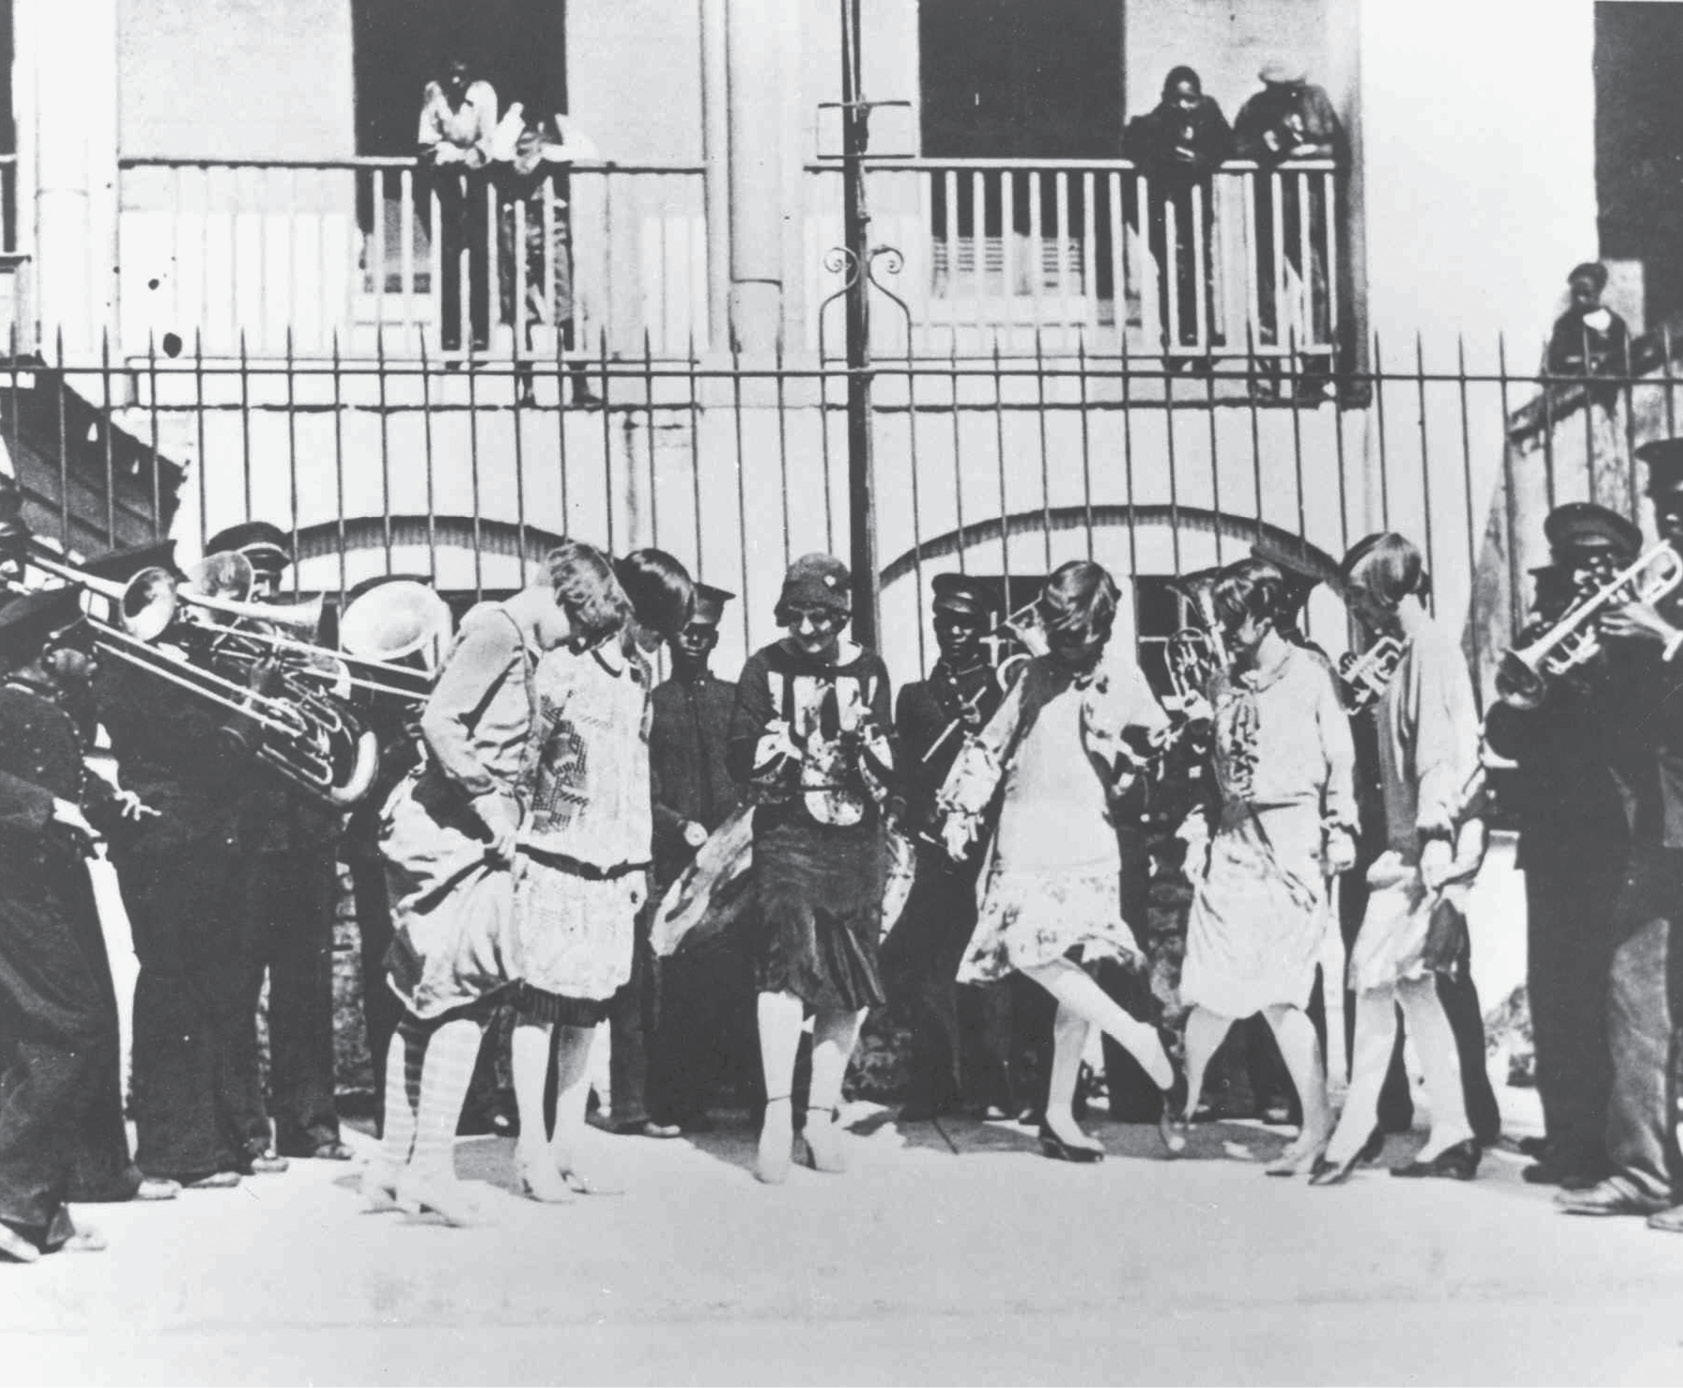 A group of flappers doing “The Charleston” alongside the Jenkins band outside the orphanage on Franklin Street, circa 1920.